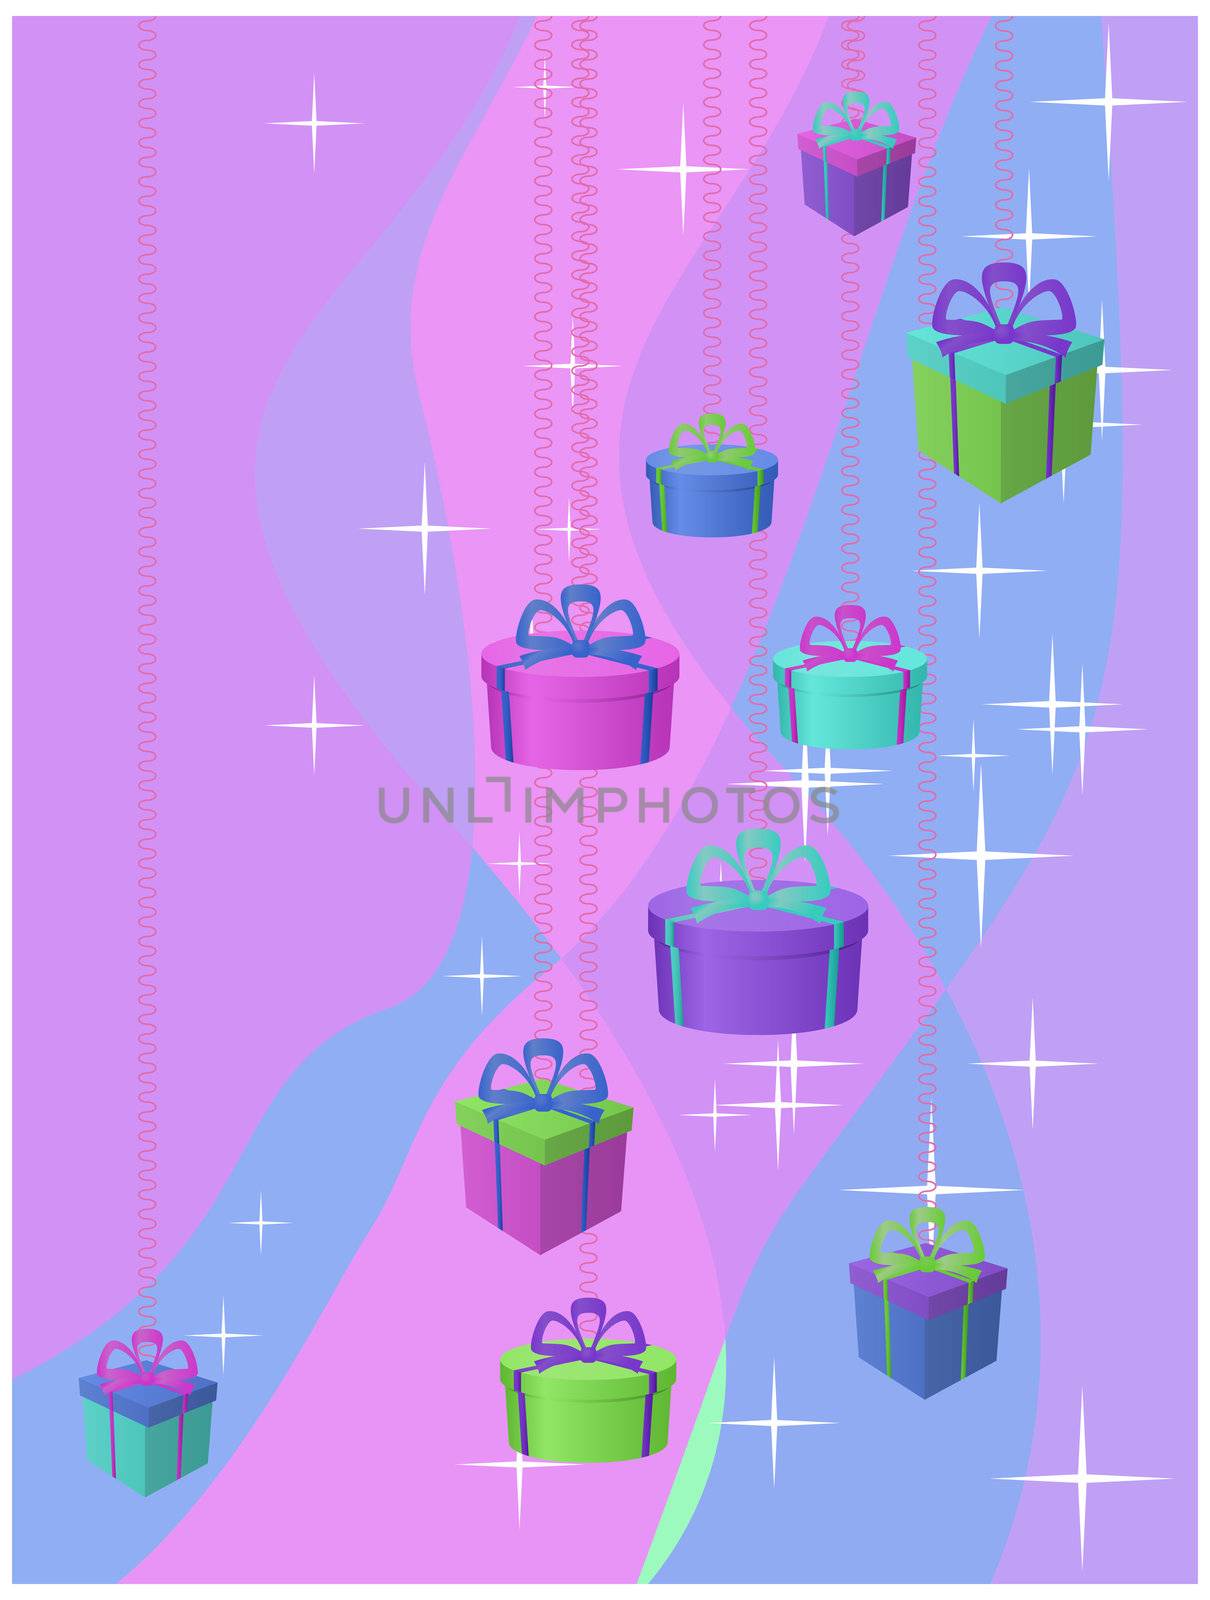 Background: stars and gift boxes on a colour background